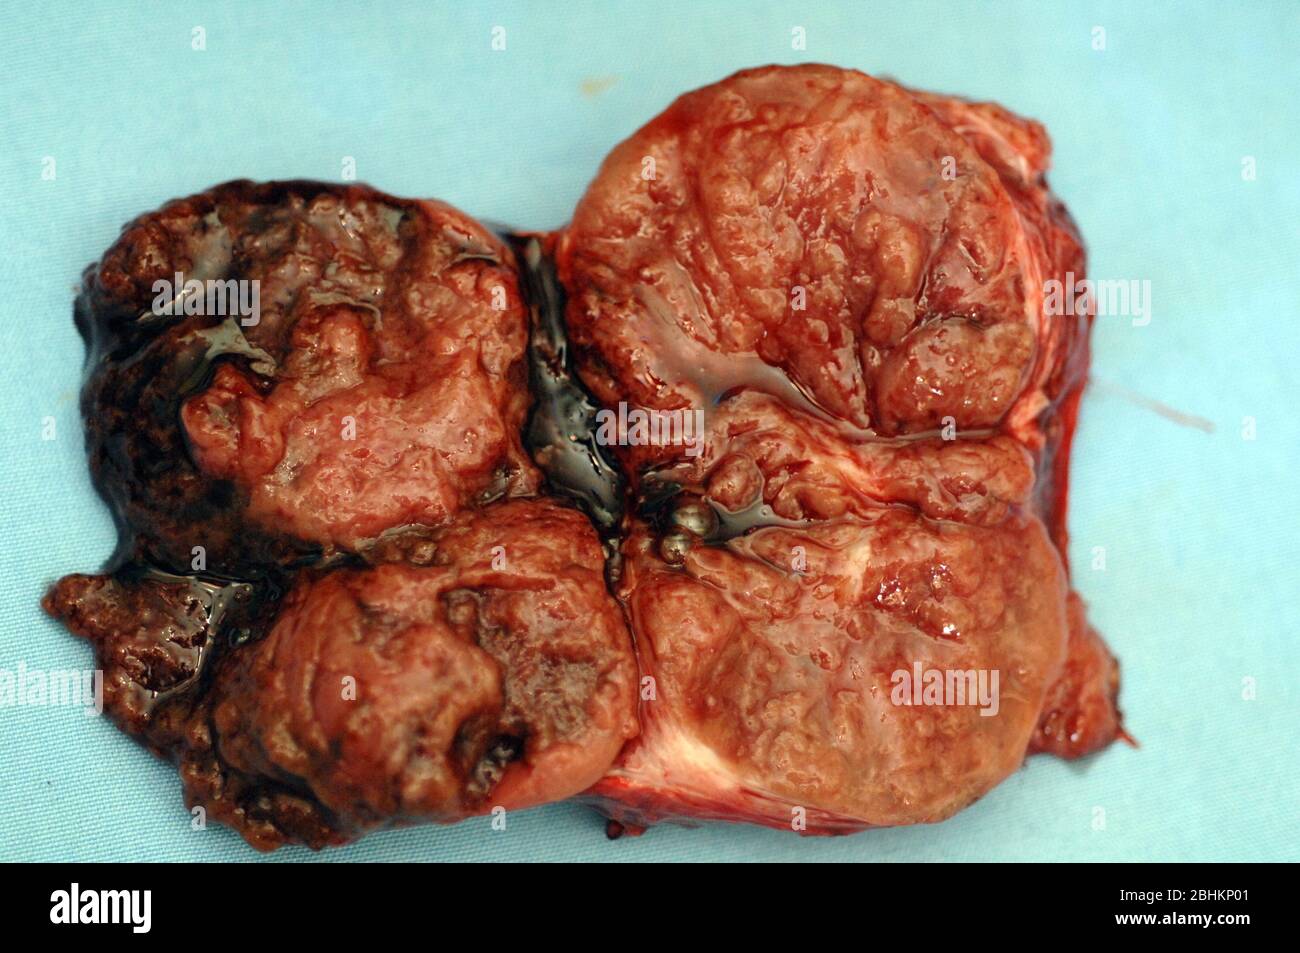 Close-up of an excised goitre (enlarged thyroid gland). Stock Photo